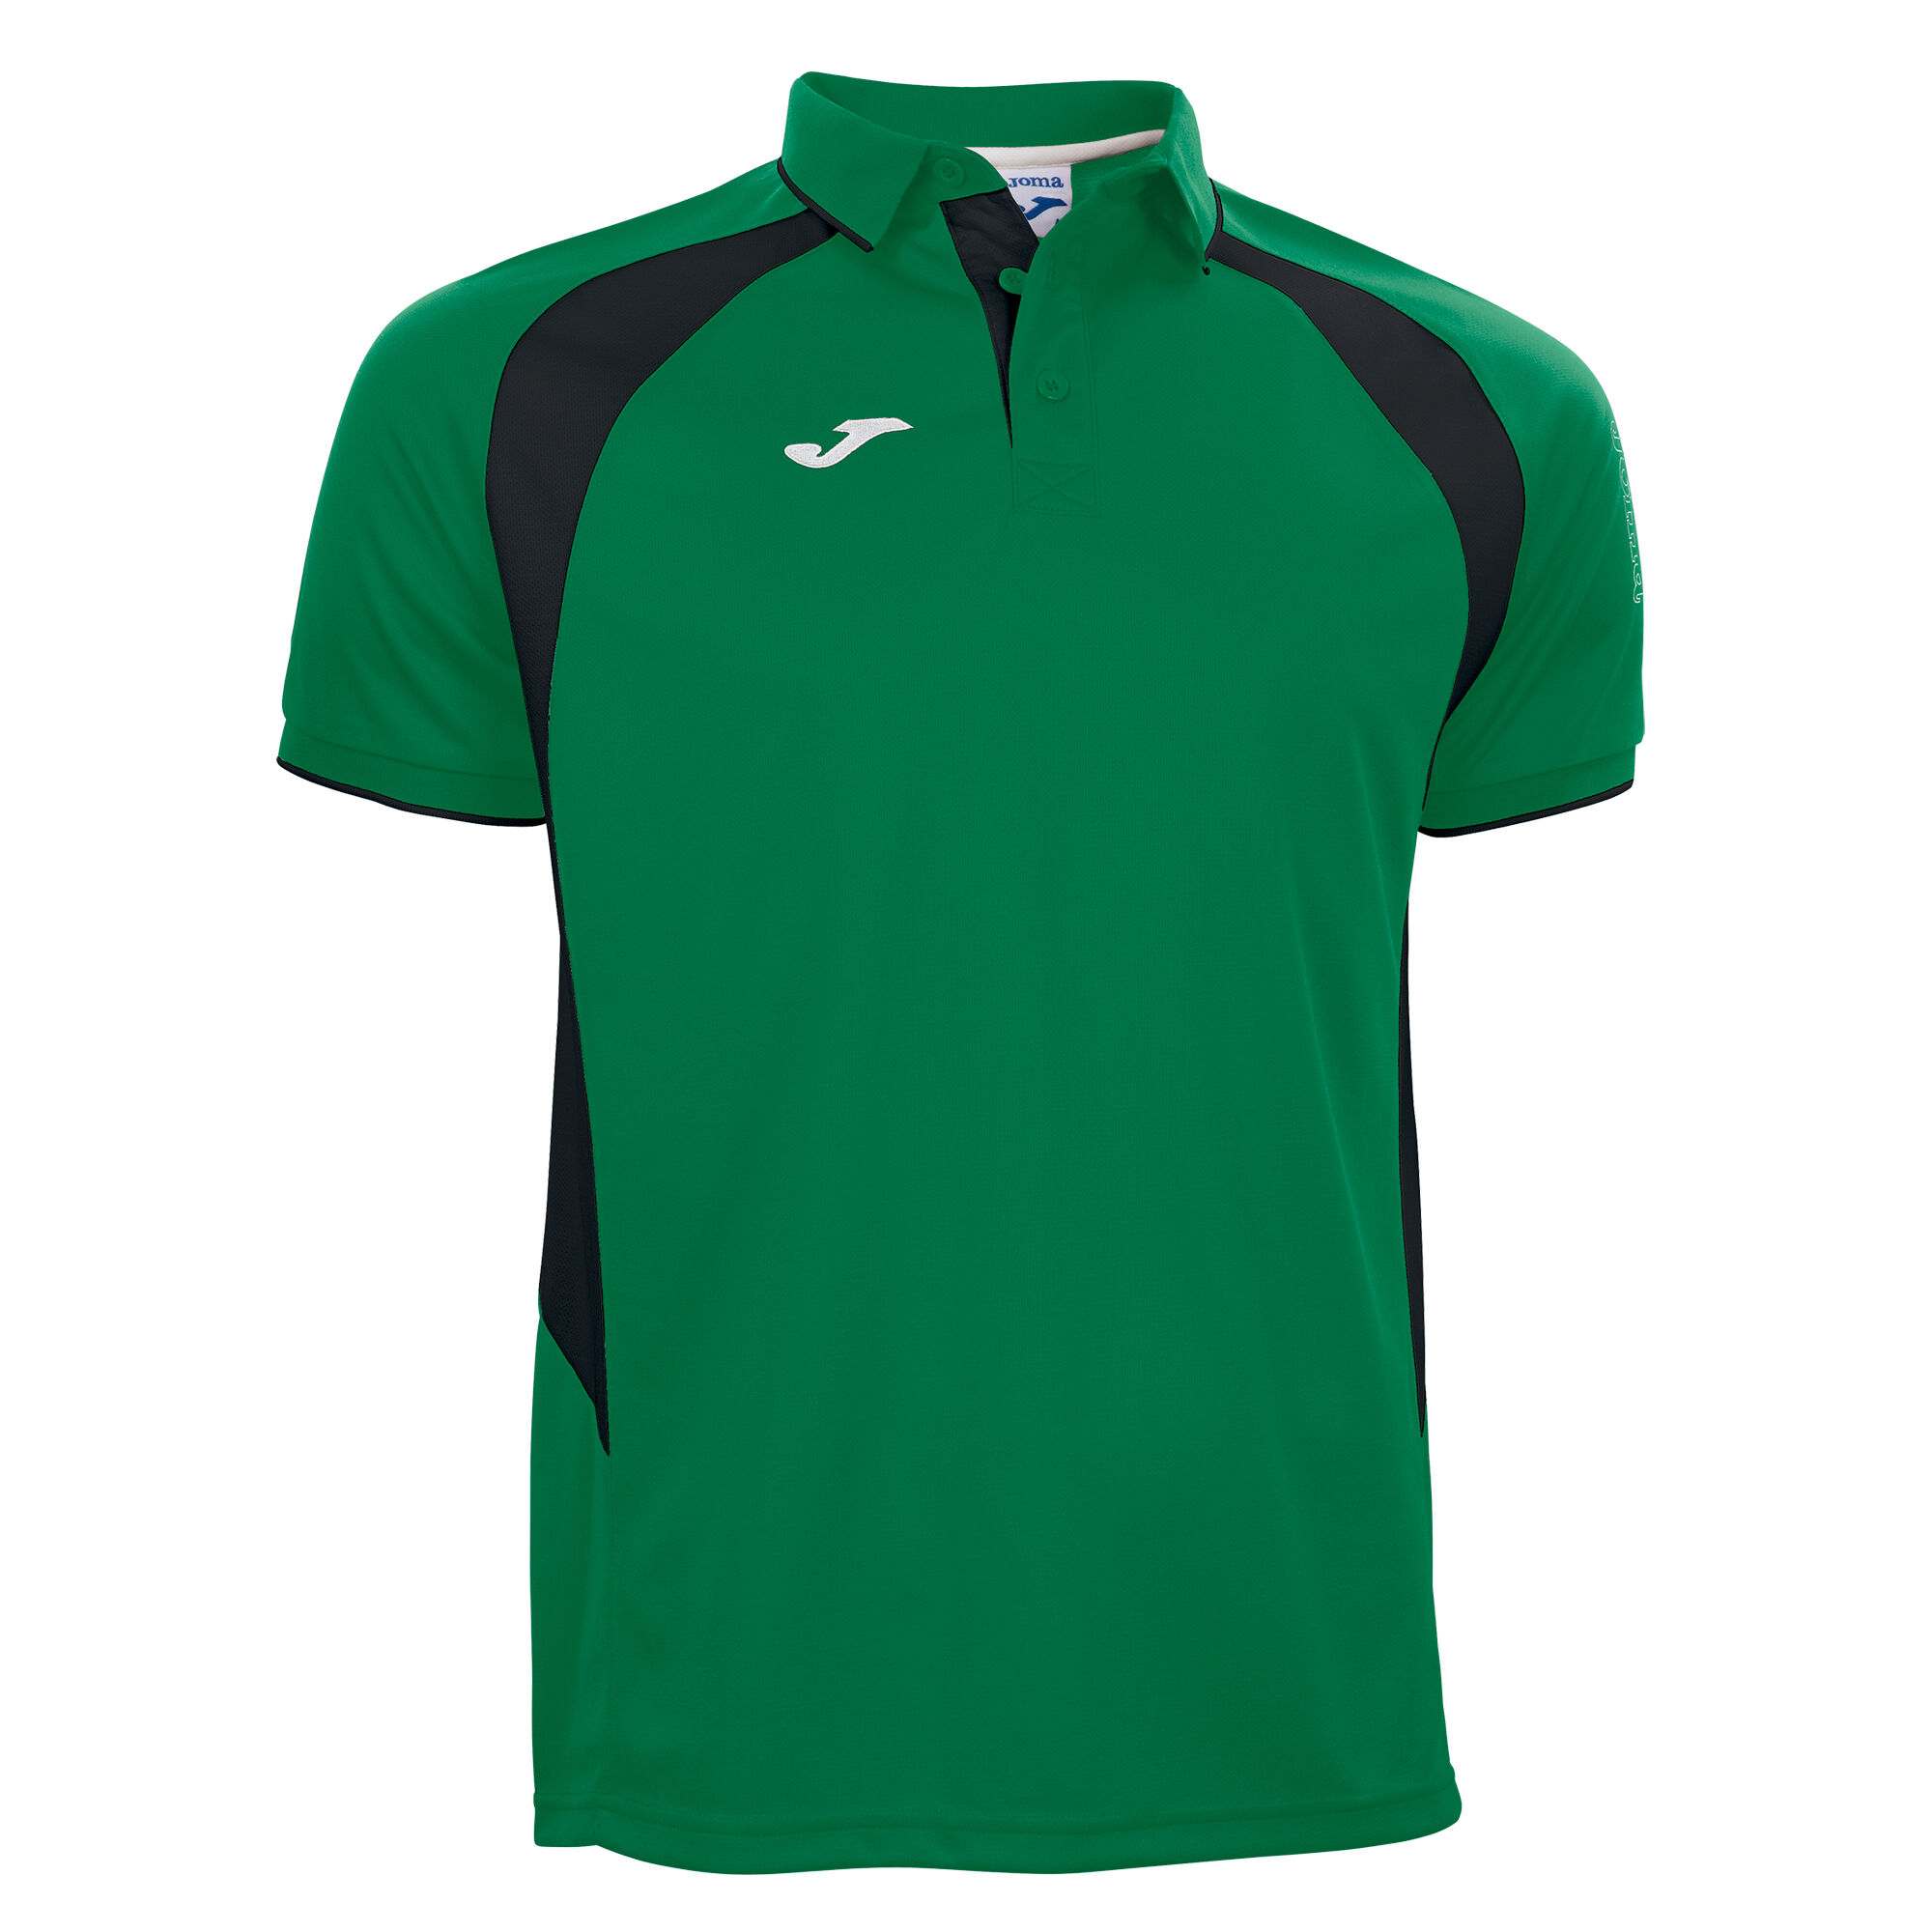 POLO MANCHES COURTES HOMME CHAMPIONSHIP III VERT NOIR